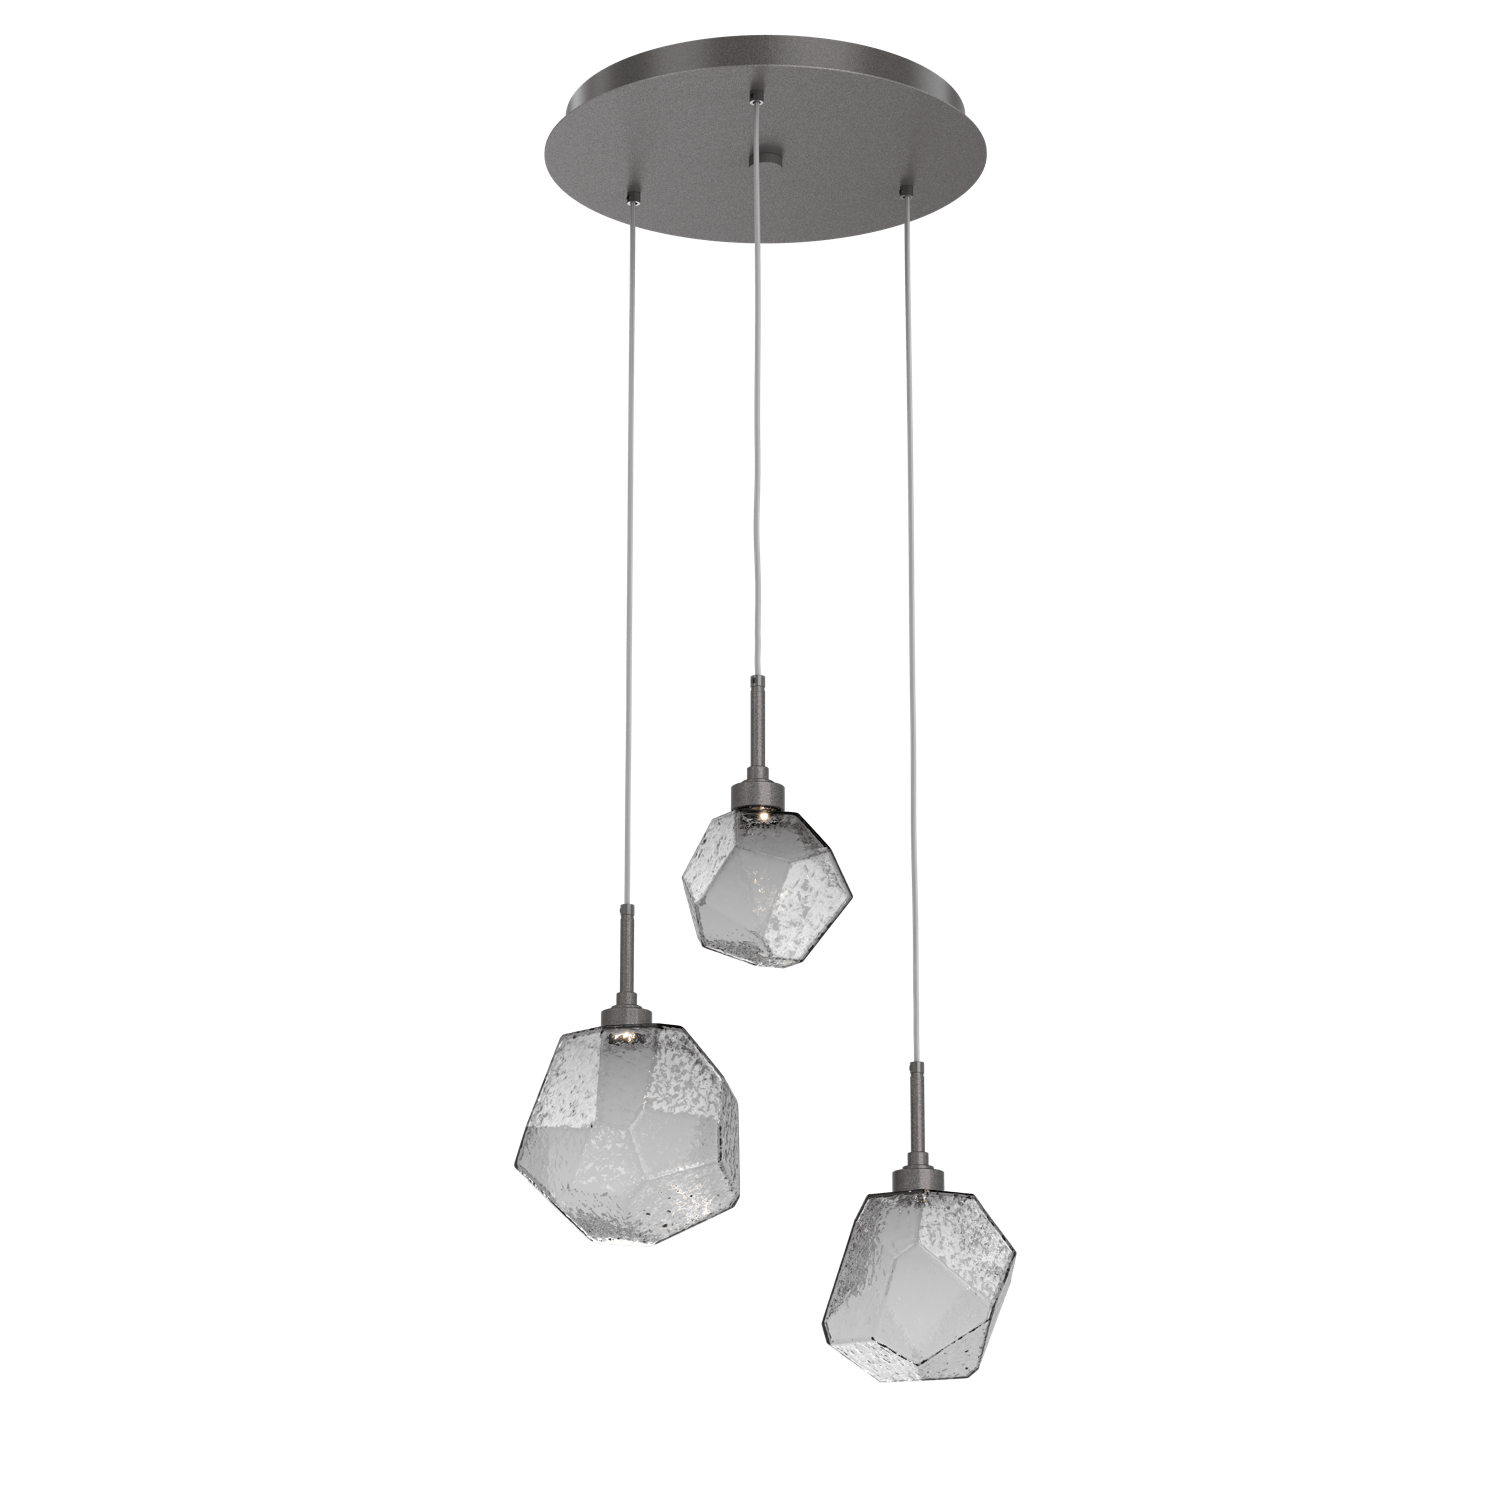 CHB0039-03-GP-S-Hammerton-Studio-Gem-3-light-round-pendant-chandelier-with-graphite-finish-and-smoke-blown-glass-shades-and-LED-lamping